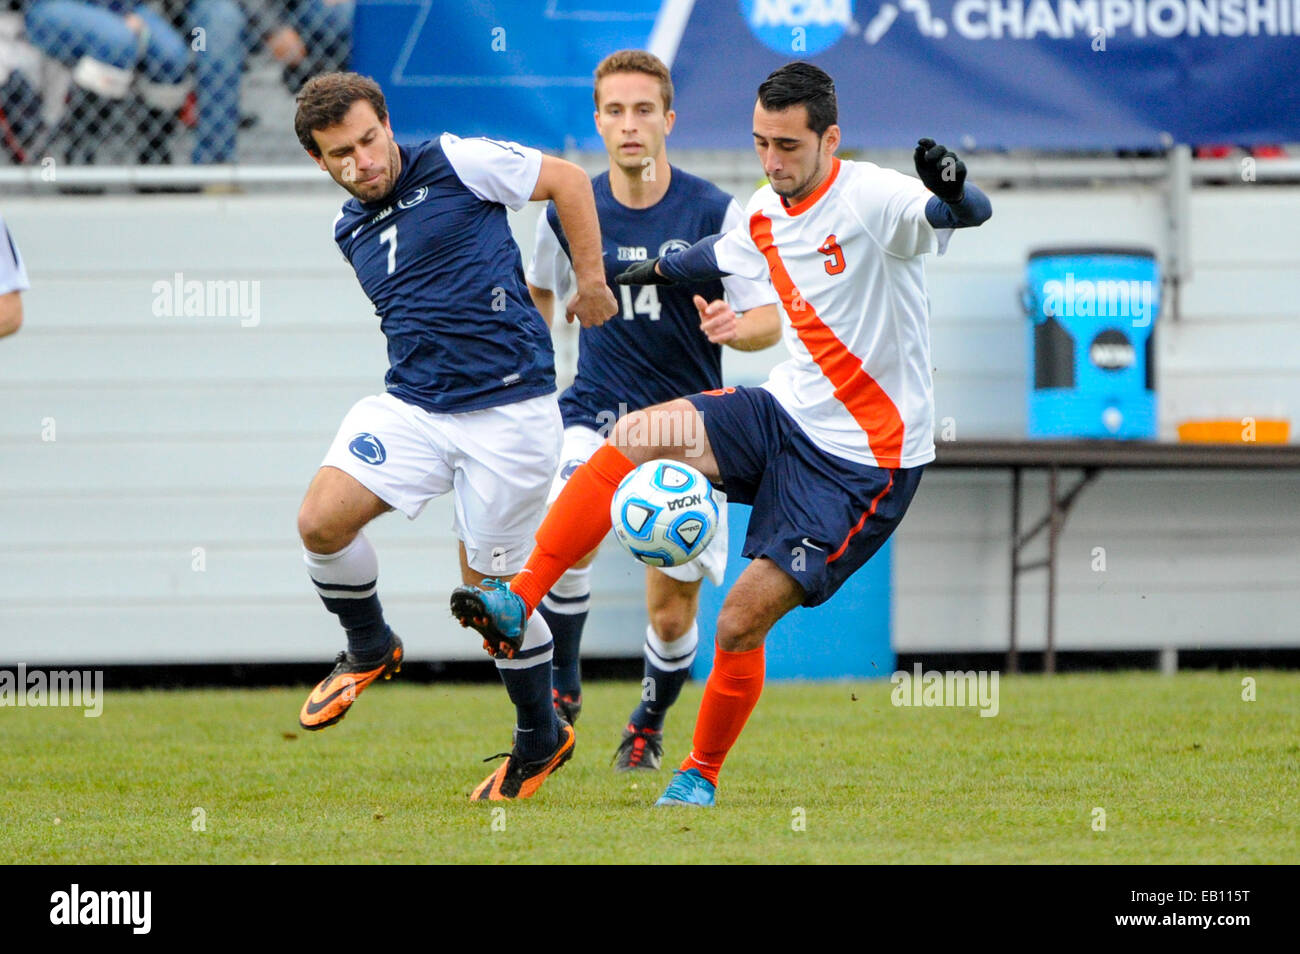 Syracuse, New York, USA. 23rd Nov, 2014. Penn State Nittany Lions midfielder Christian Kaschak (7) and Syracuse Orange midfielder Stefanos Stamoulacatos (9) battle for a loose ball during the first half of a 2014 NCAA Men's Soccer Tournament second round match between the Penn State Nittany Lions and the Syracuse Orange at the SU Soccer Stadium in Syracuse, New York. Syracuse defeated Penn State 2-1. Rich Barnes/CSM/Alamy Live News Stock Photo